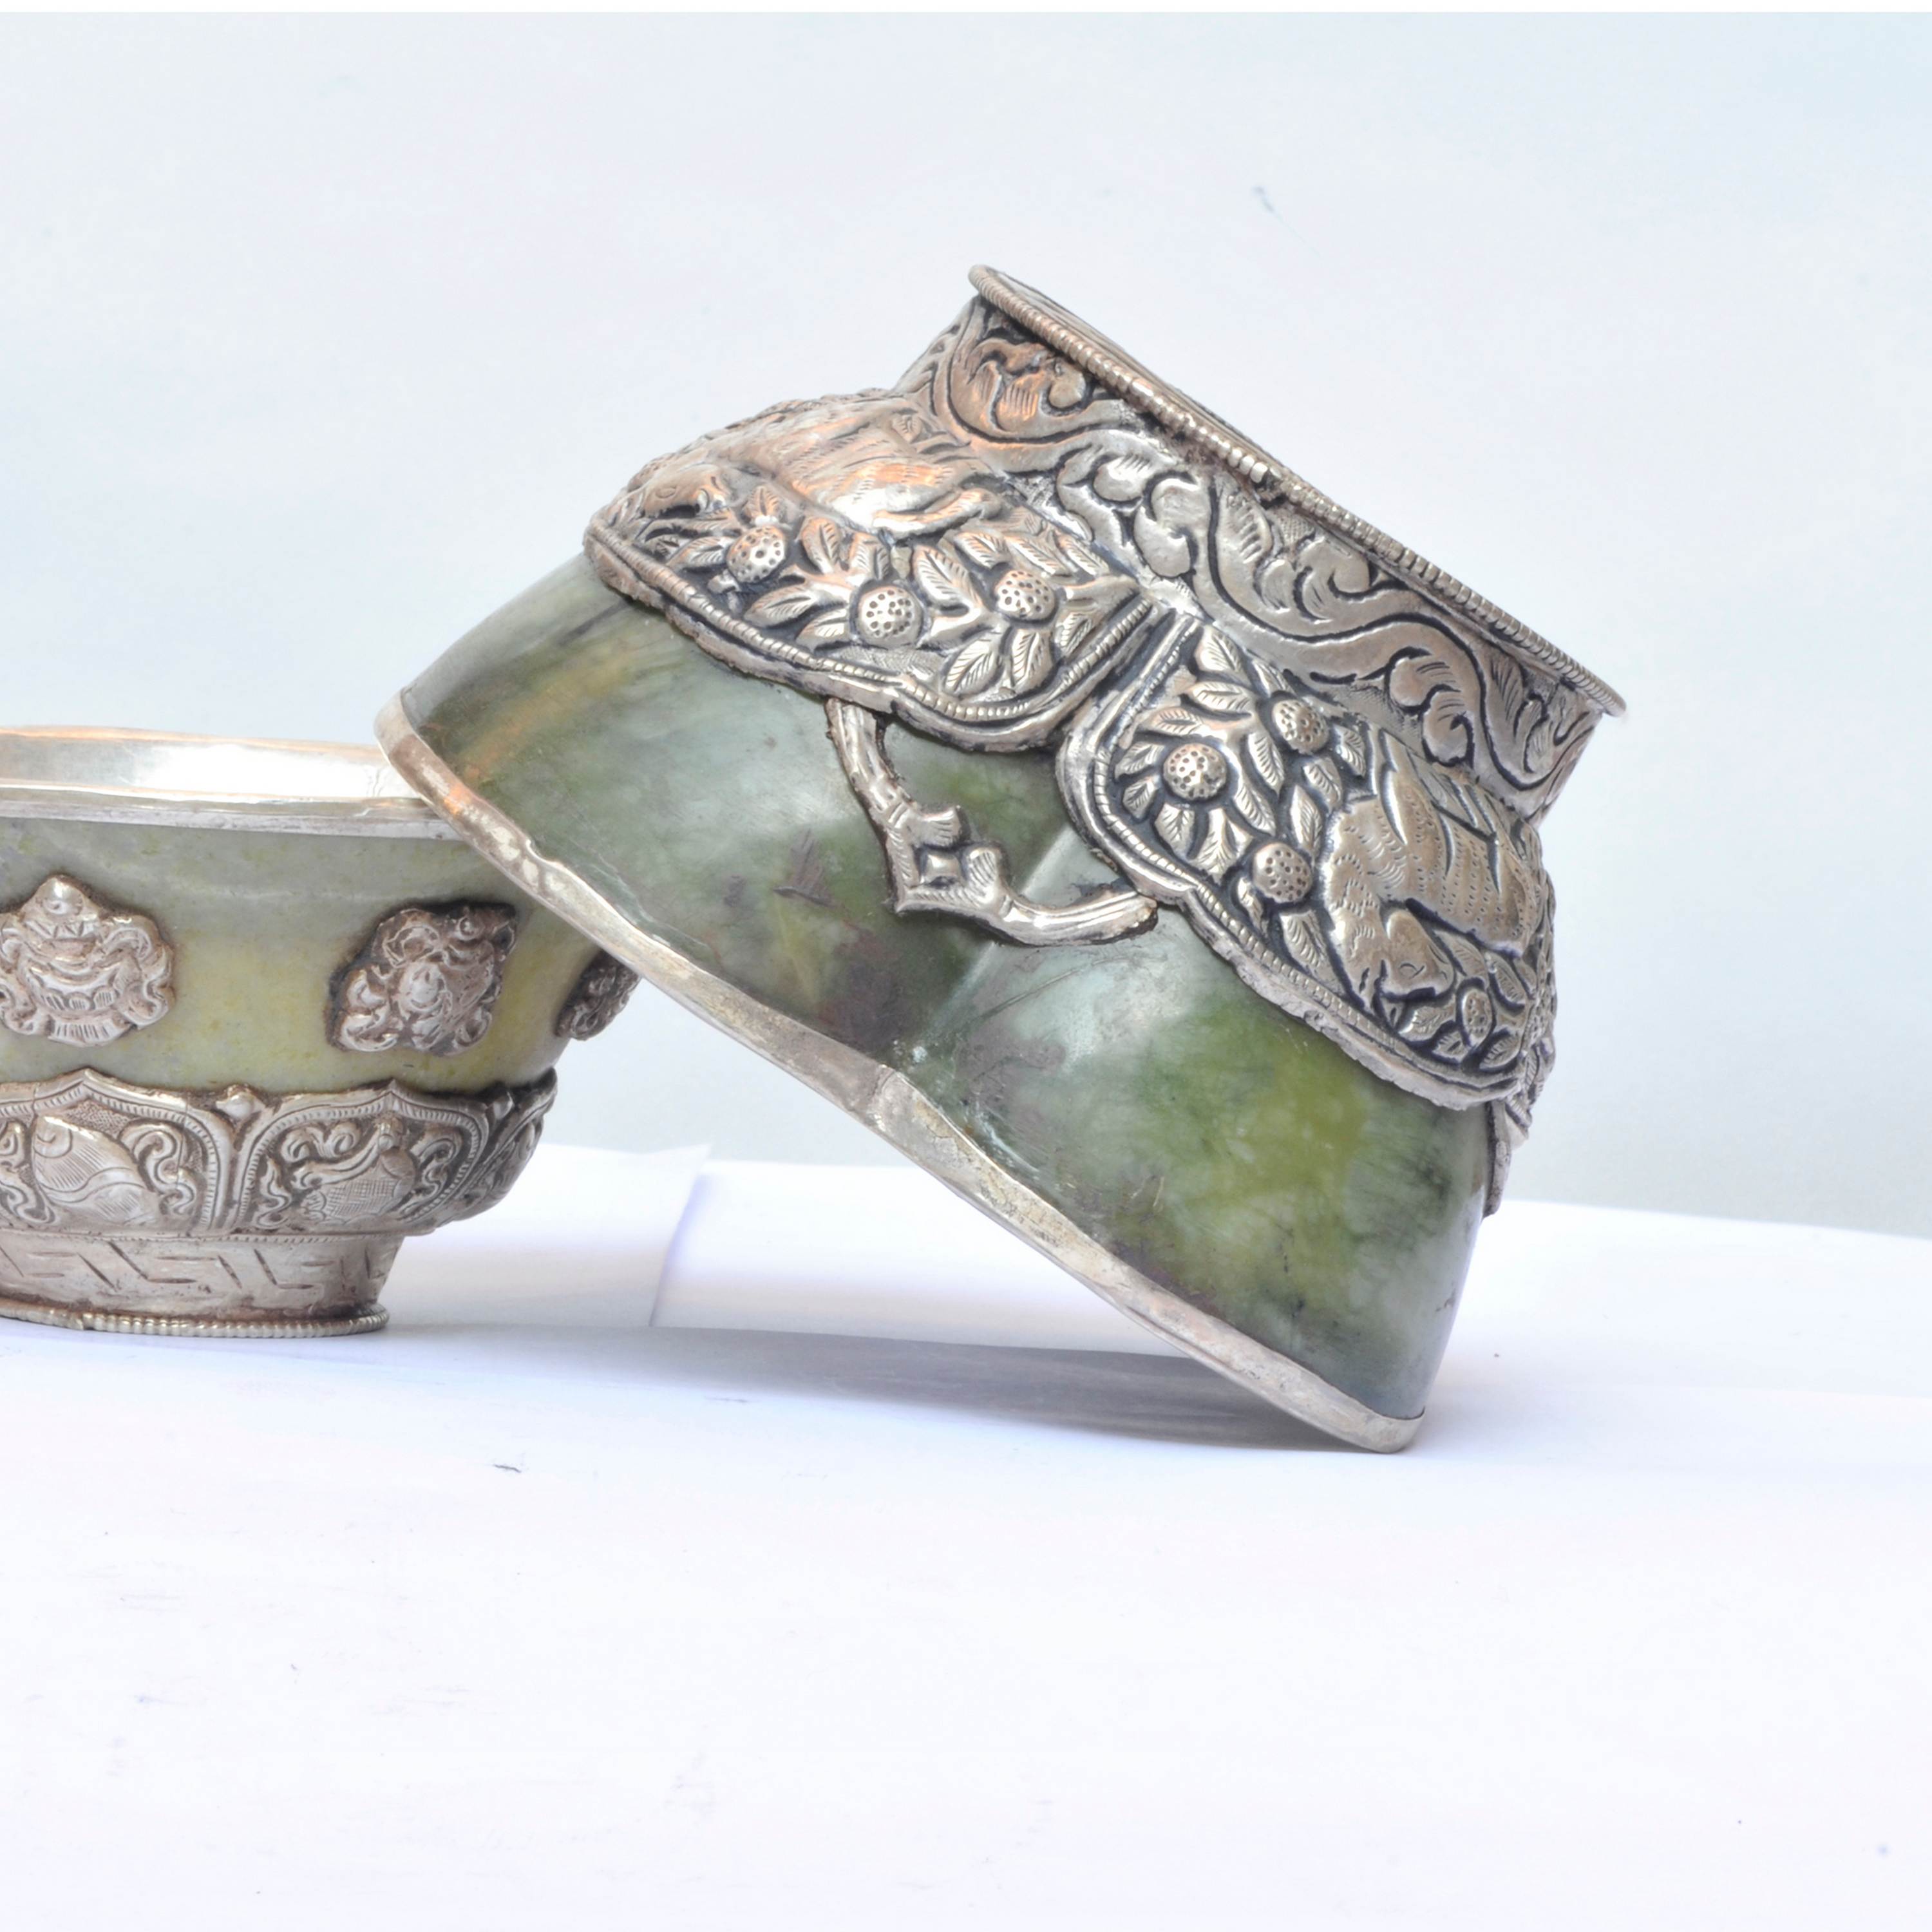 Silver Cup With Emitted amber Offering Bowl With Lotus Design And jade Stone, jade Stone, silver Carving, Metal Stone Setting